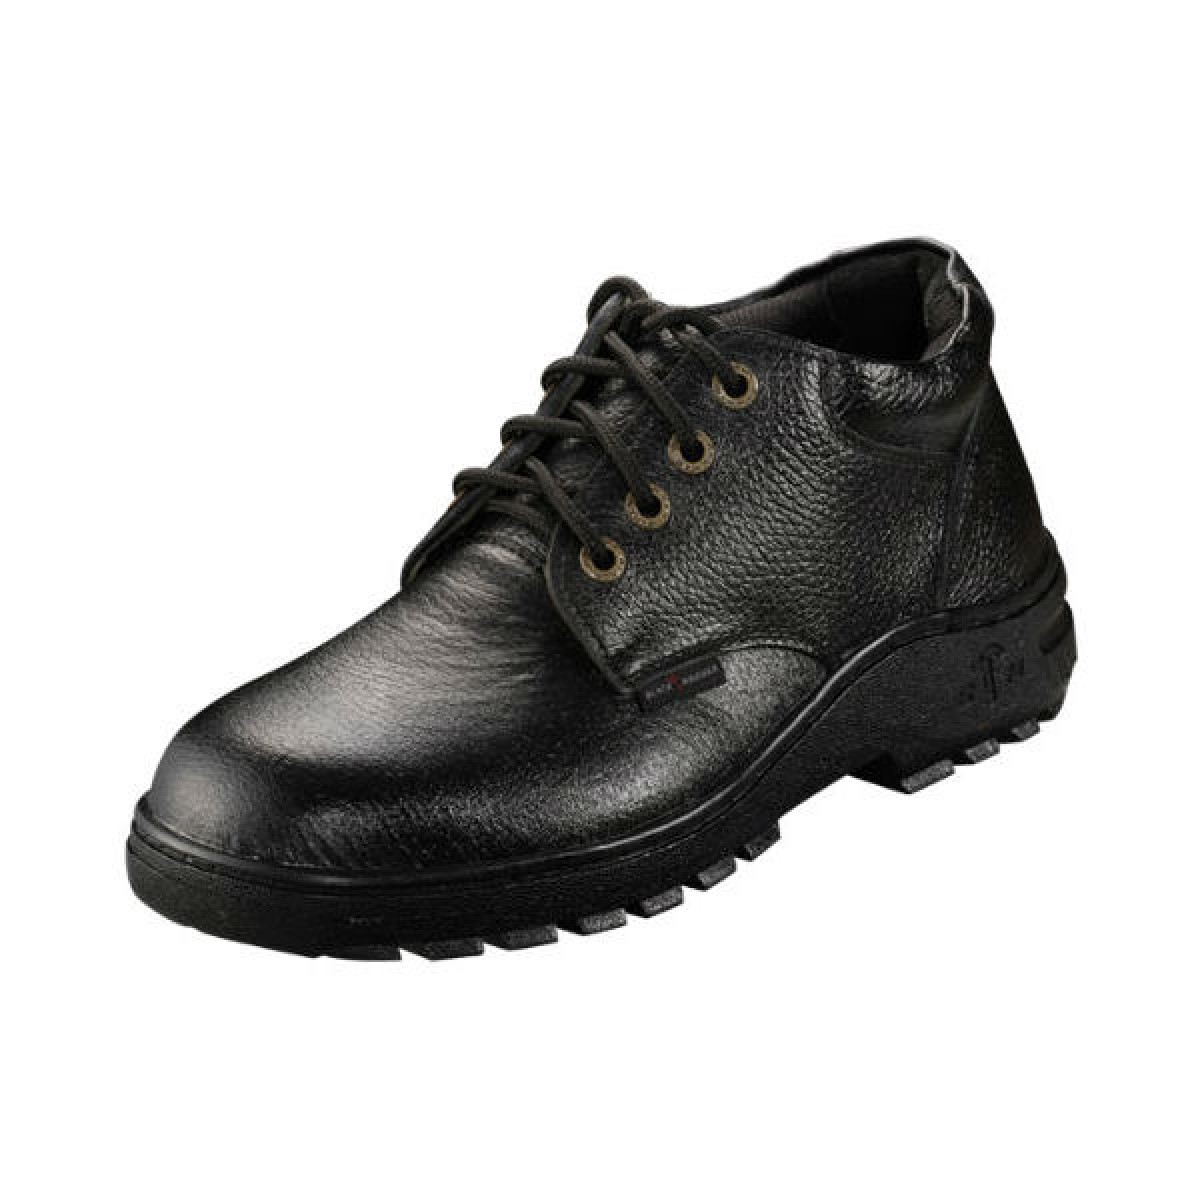 Black Hammer Safety Shoes Malaysia